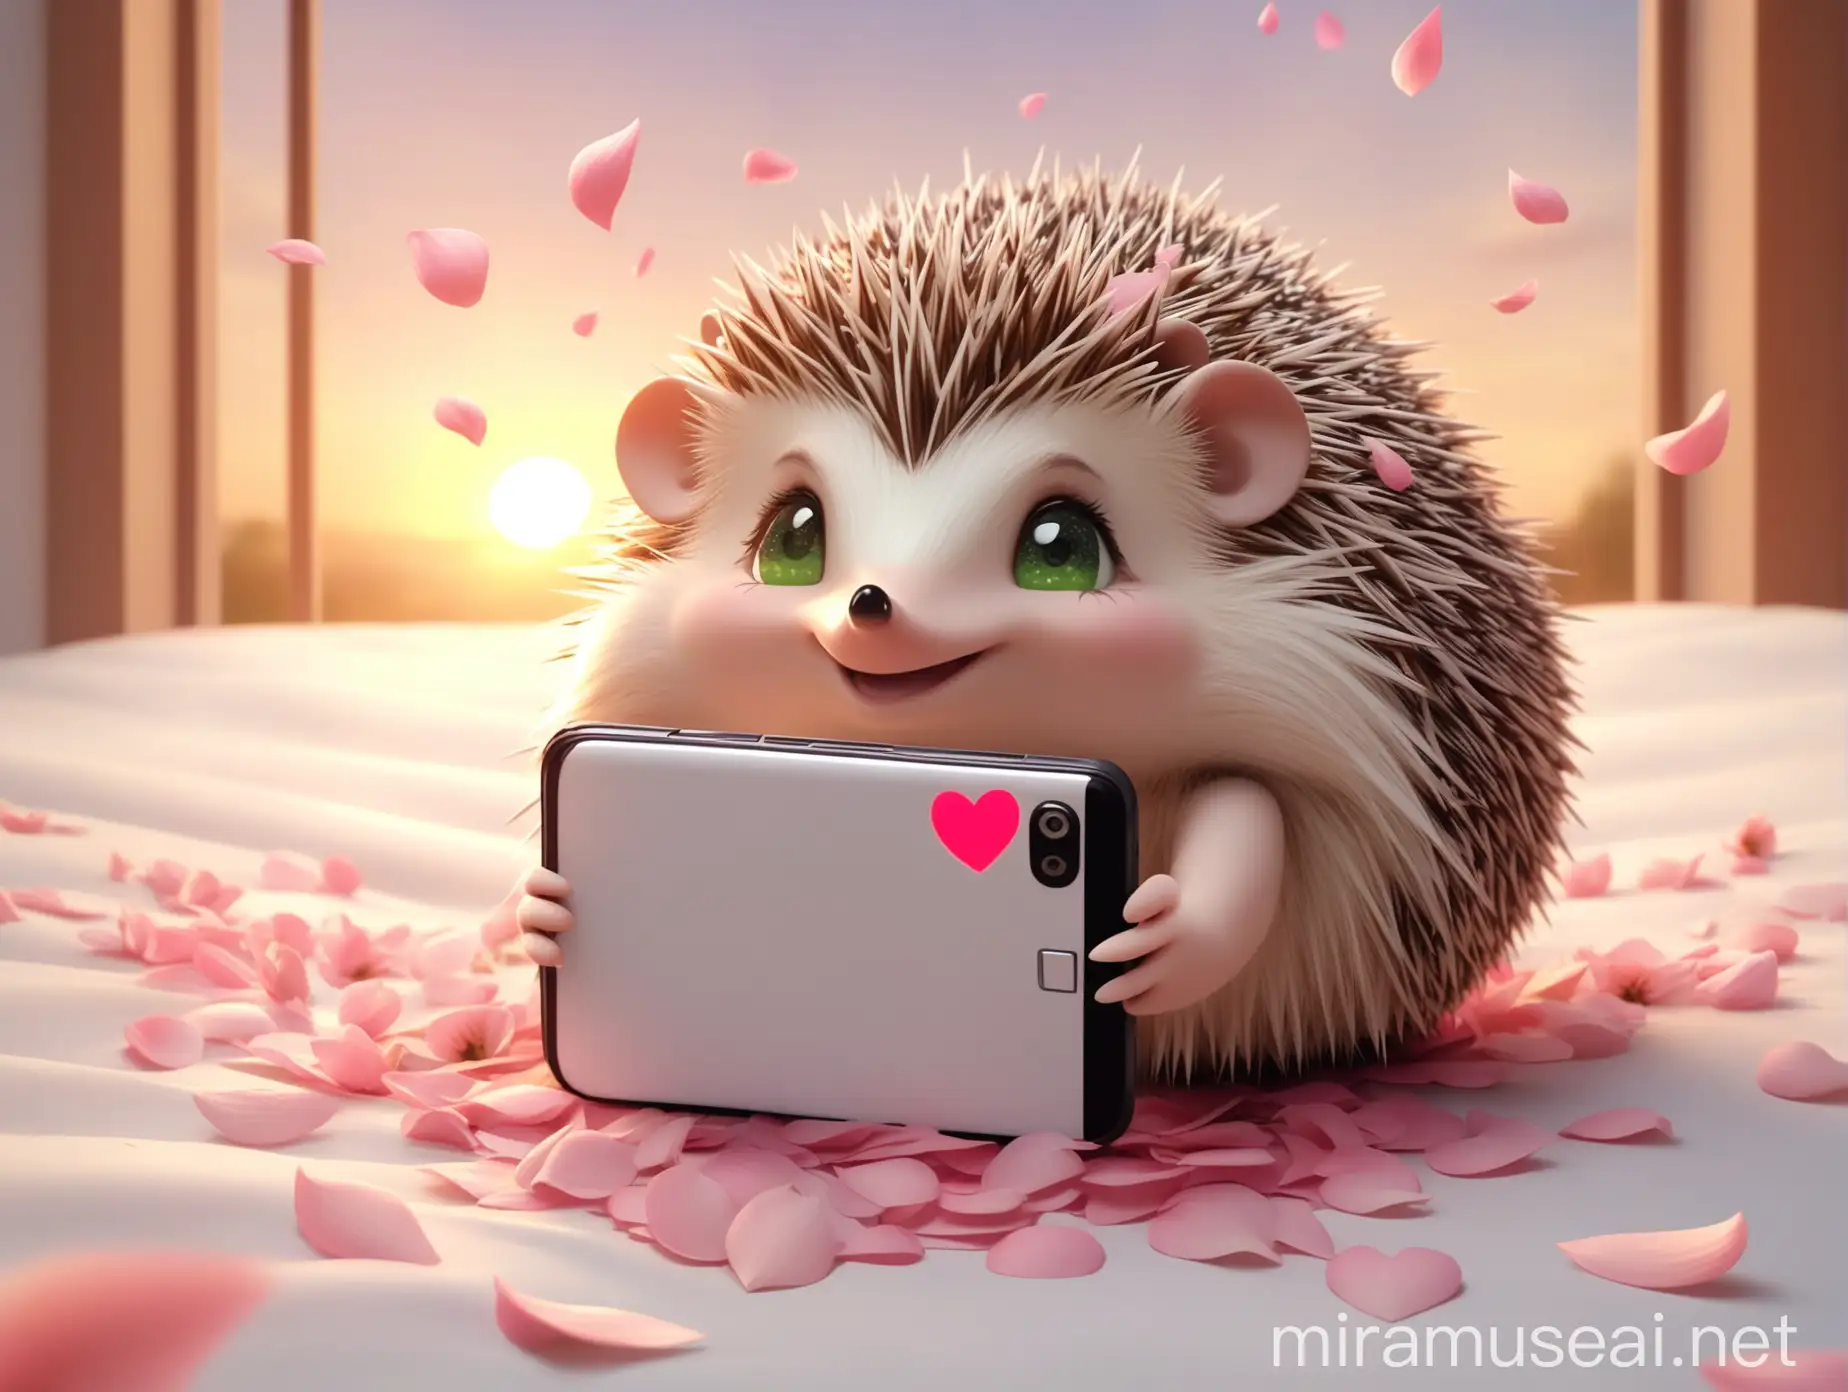 HEDGEHOG: Form - Small female hedgehog. Color - Soft, light-brown quills and white belly. Face - Big, shiny, green eyes, small pink snout and sweet smile. Details - Eyelashes to emphasize femininity. Accessories: Ribbon - Small pink ribbon on head, between ears. Flowers: Little flowers around. Scene - On bed. Activity: Reading a romantic message on smartphone, heart drawn on smartphone. Elements of romance: Falling flower petals, possibly light pink tint in sky at sunset. Emotion: Happy and joyful expression, to convey romance and tenderness of scene.